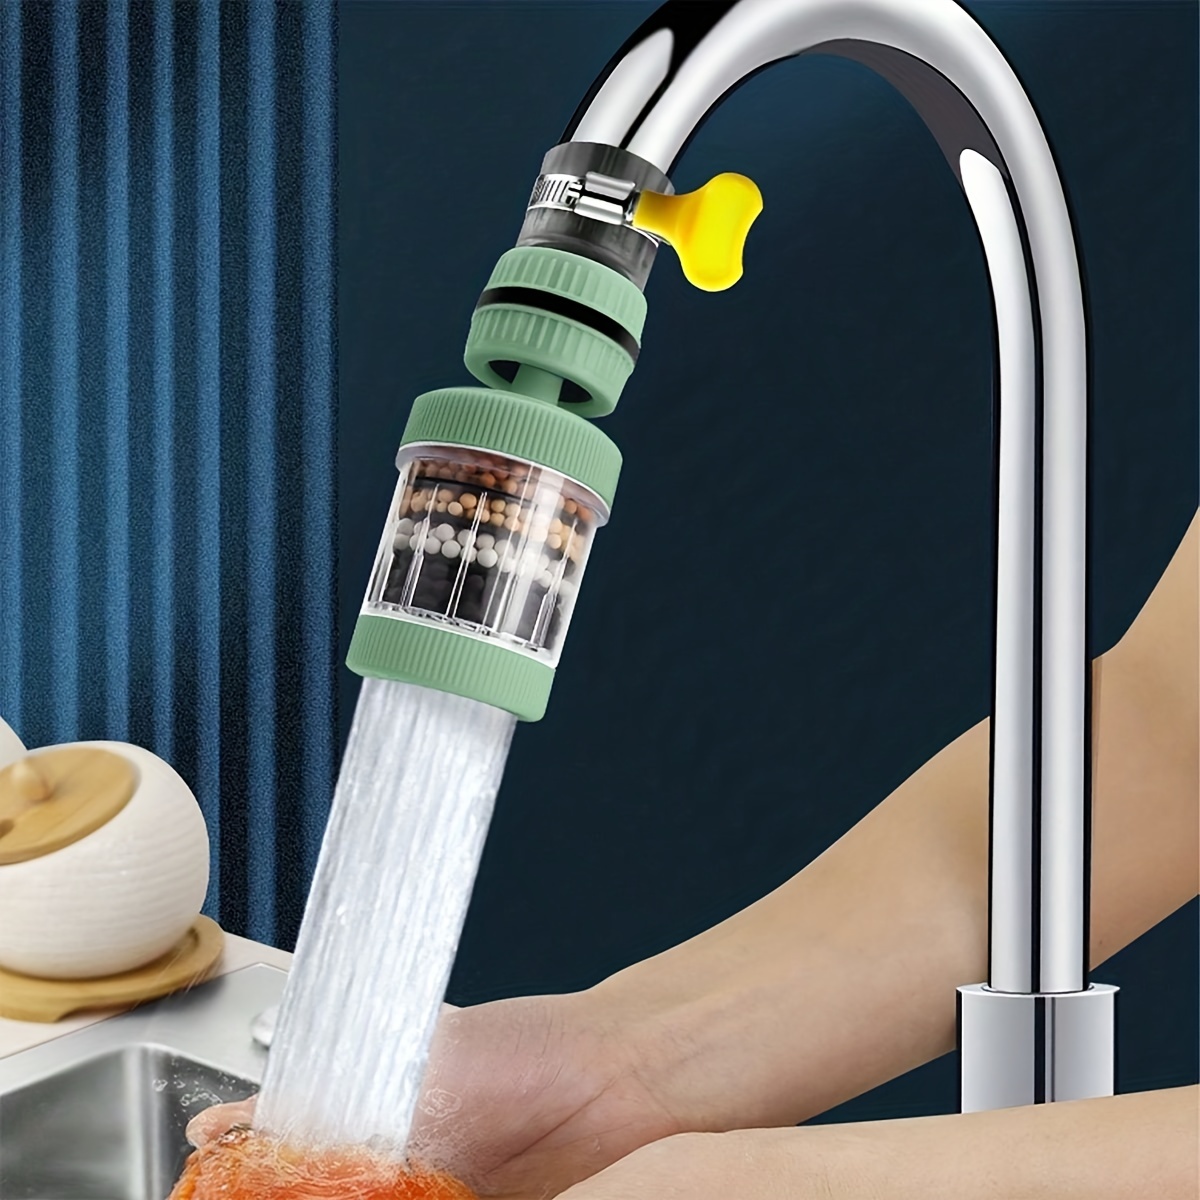 

1pc Faucet Mount Filters, 6 Layer Faucet Water Filter, Swivel Kitchen Tap Filtration Aerator, Anti-splash Faucet Purifier For Home Kitchen Bathroom